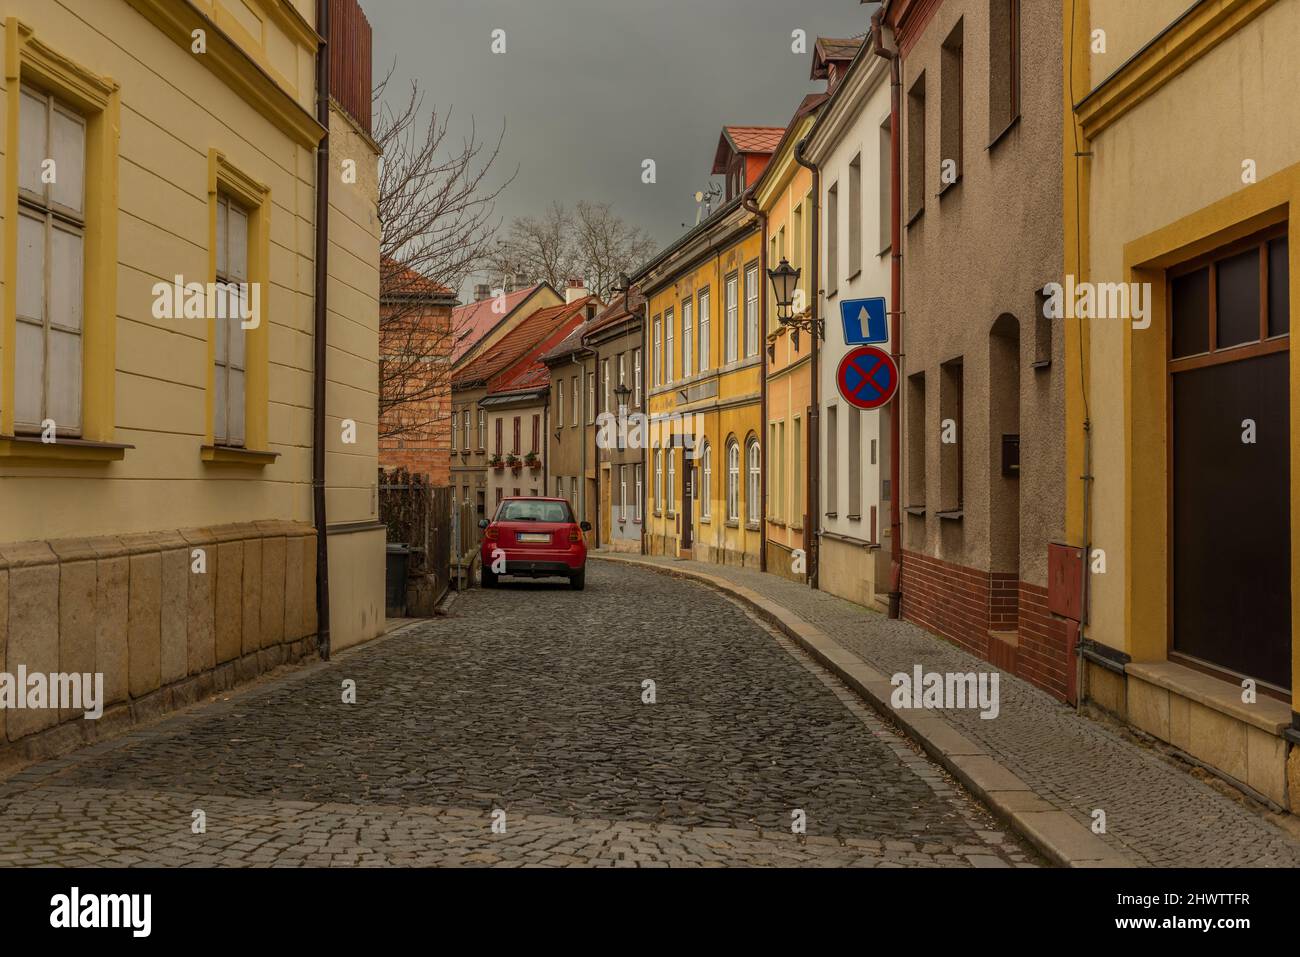 Jicin town after winter storm with color old buildings Stock Photo